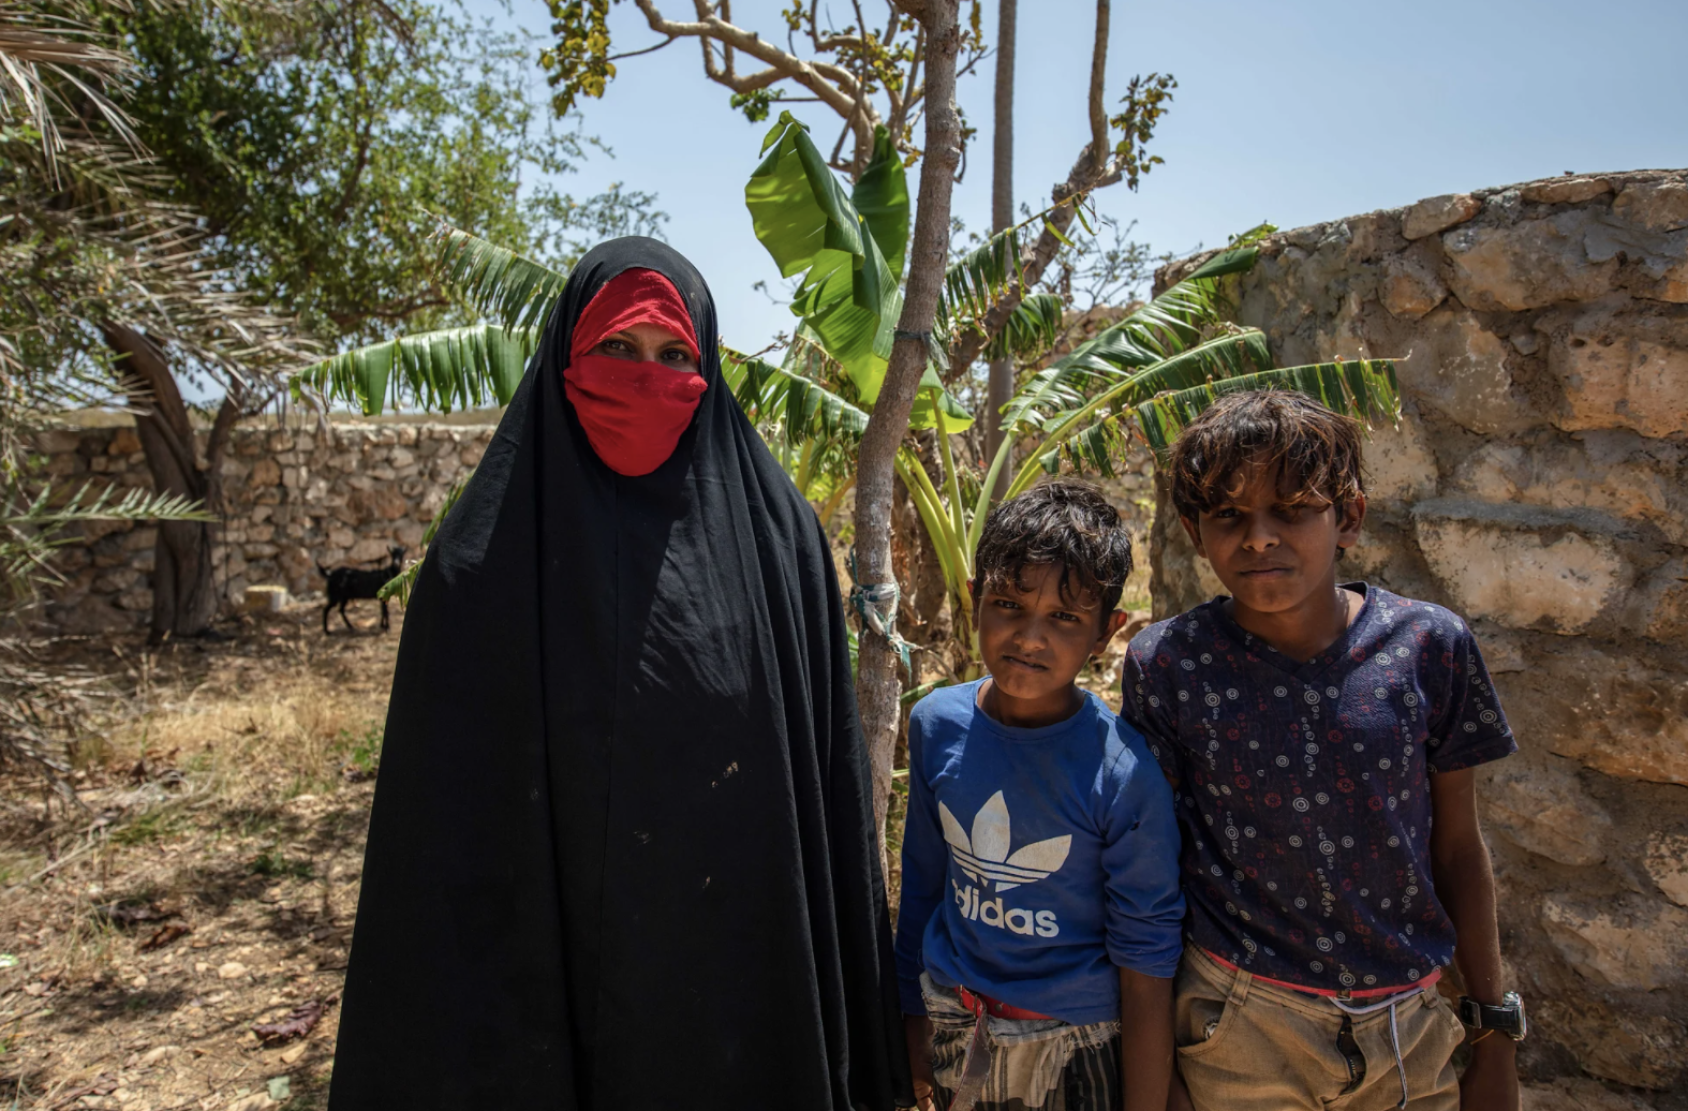 A woman in a black and red hijab stands next to two young boys in blue shirts. 